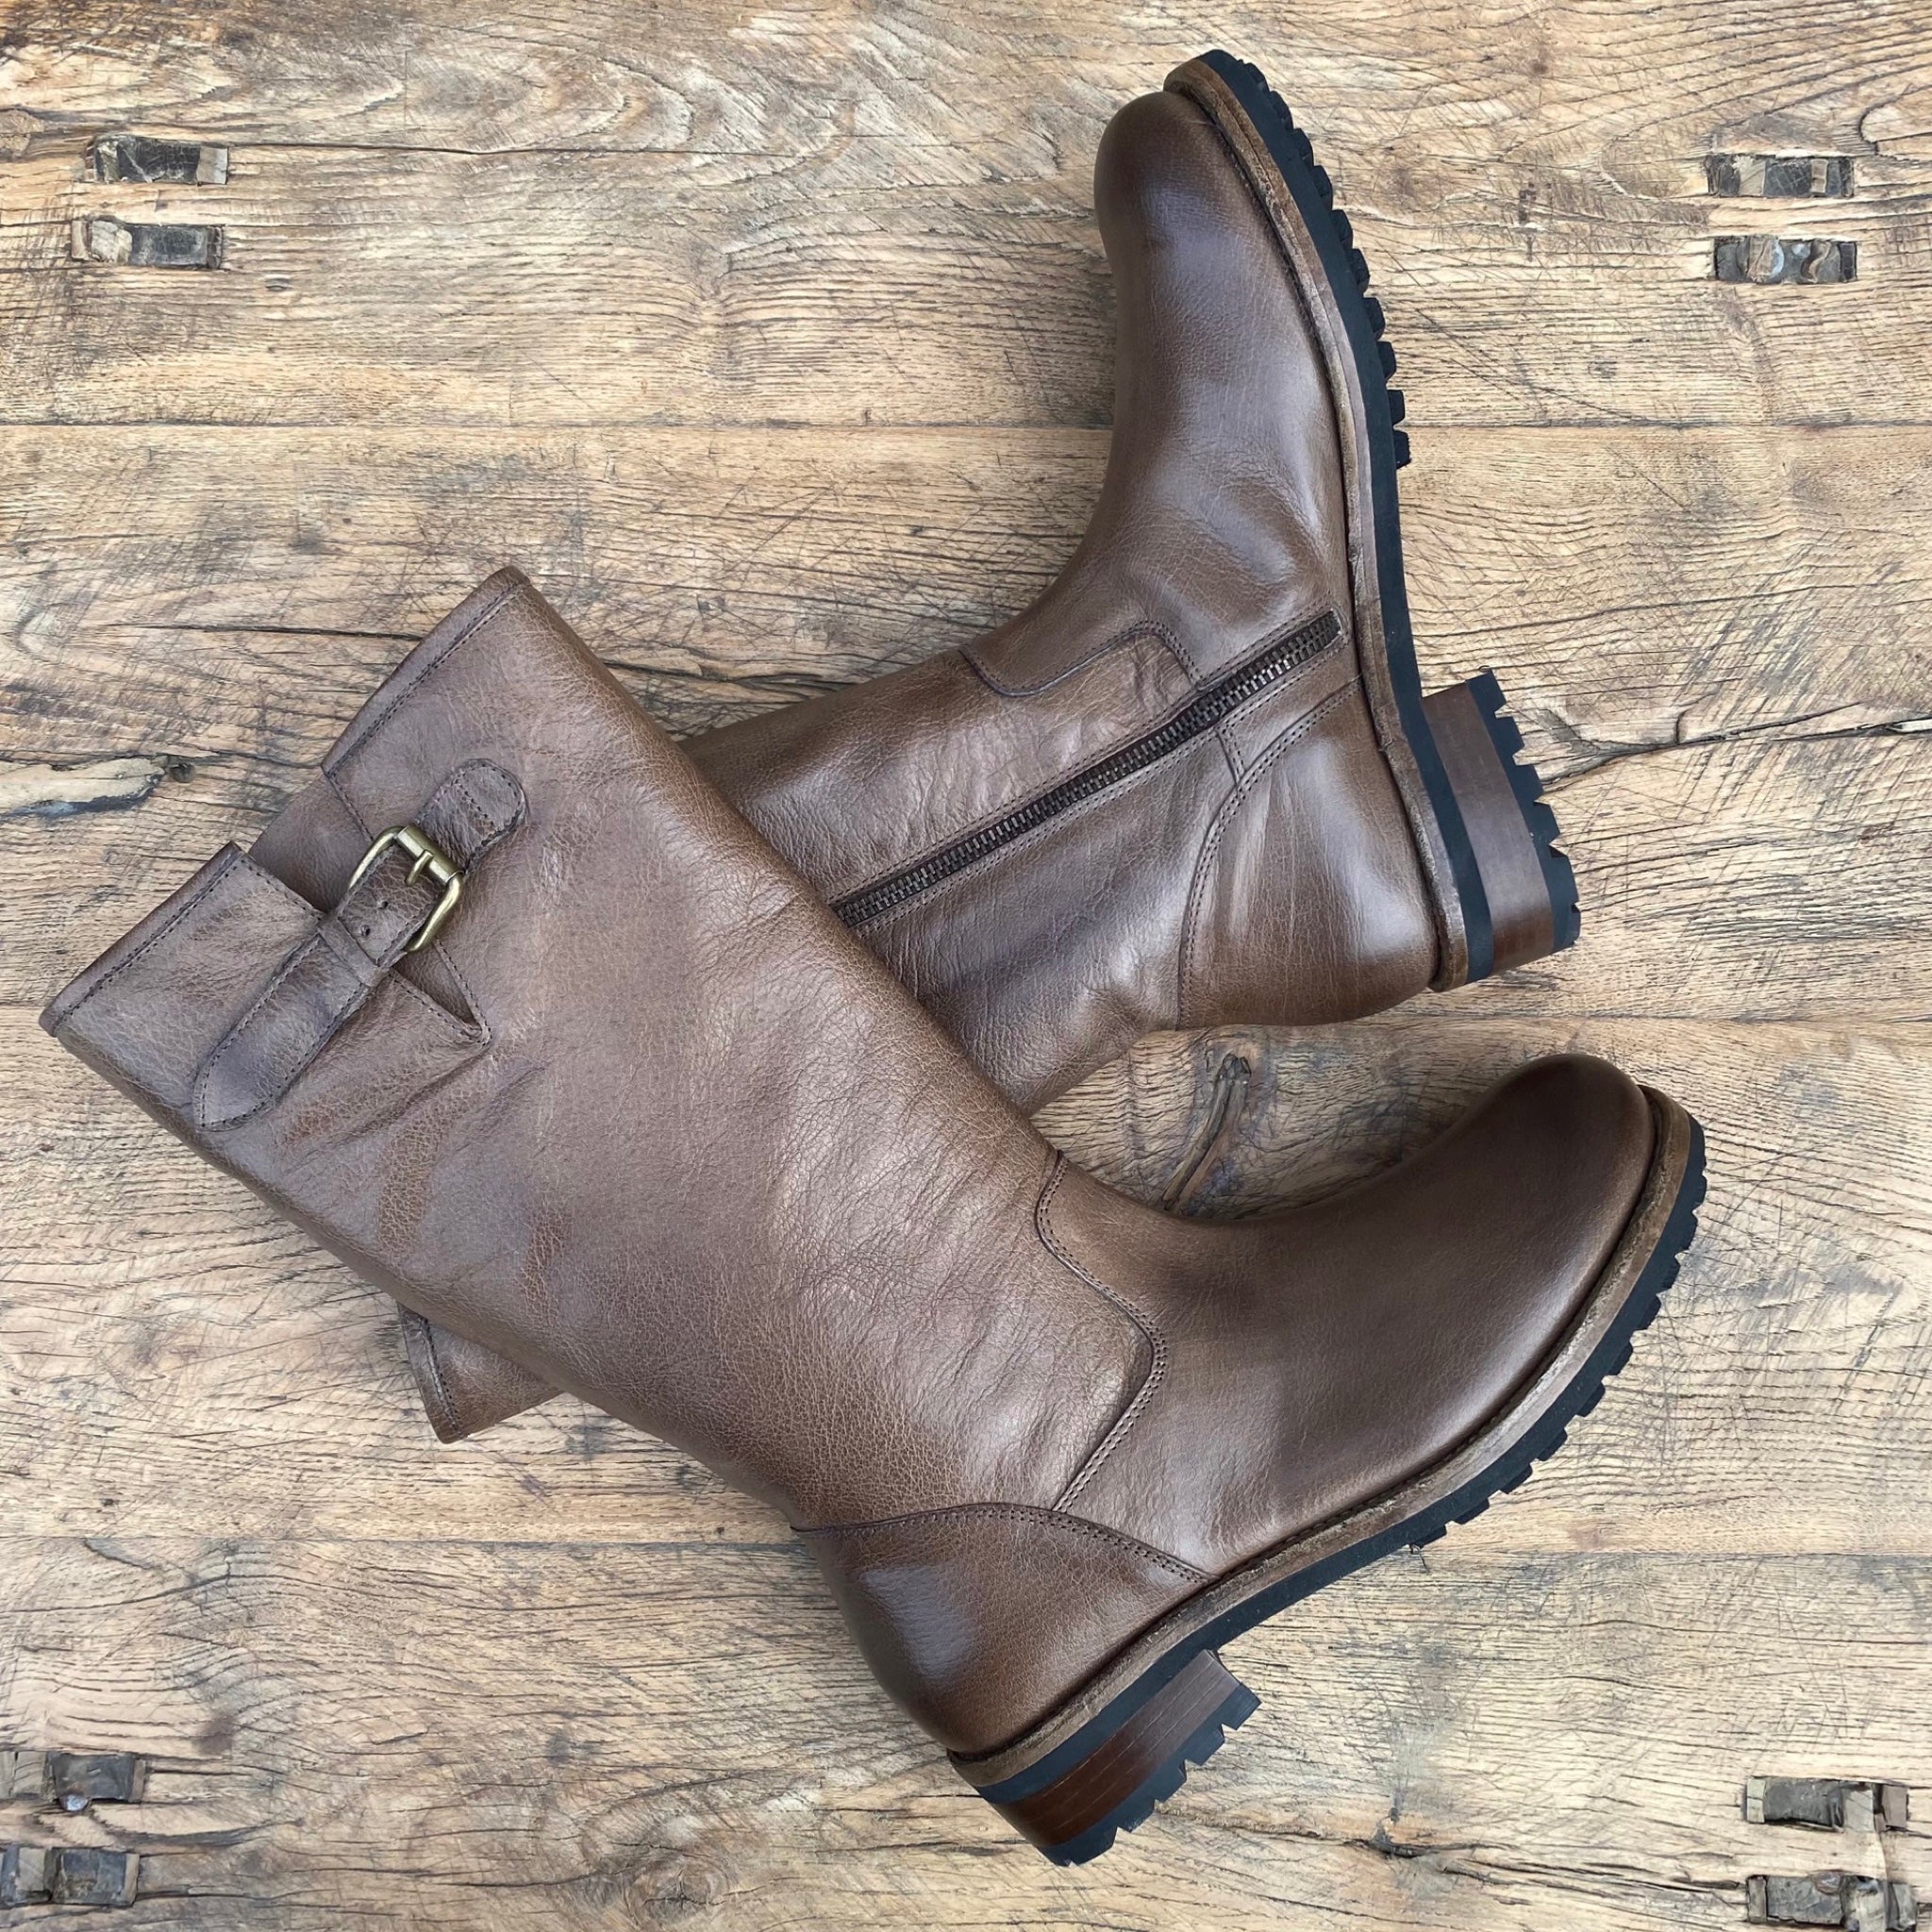 Victoria Varrasso Buffalo Leather Land Boots